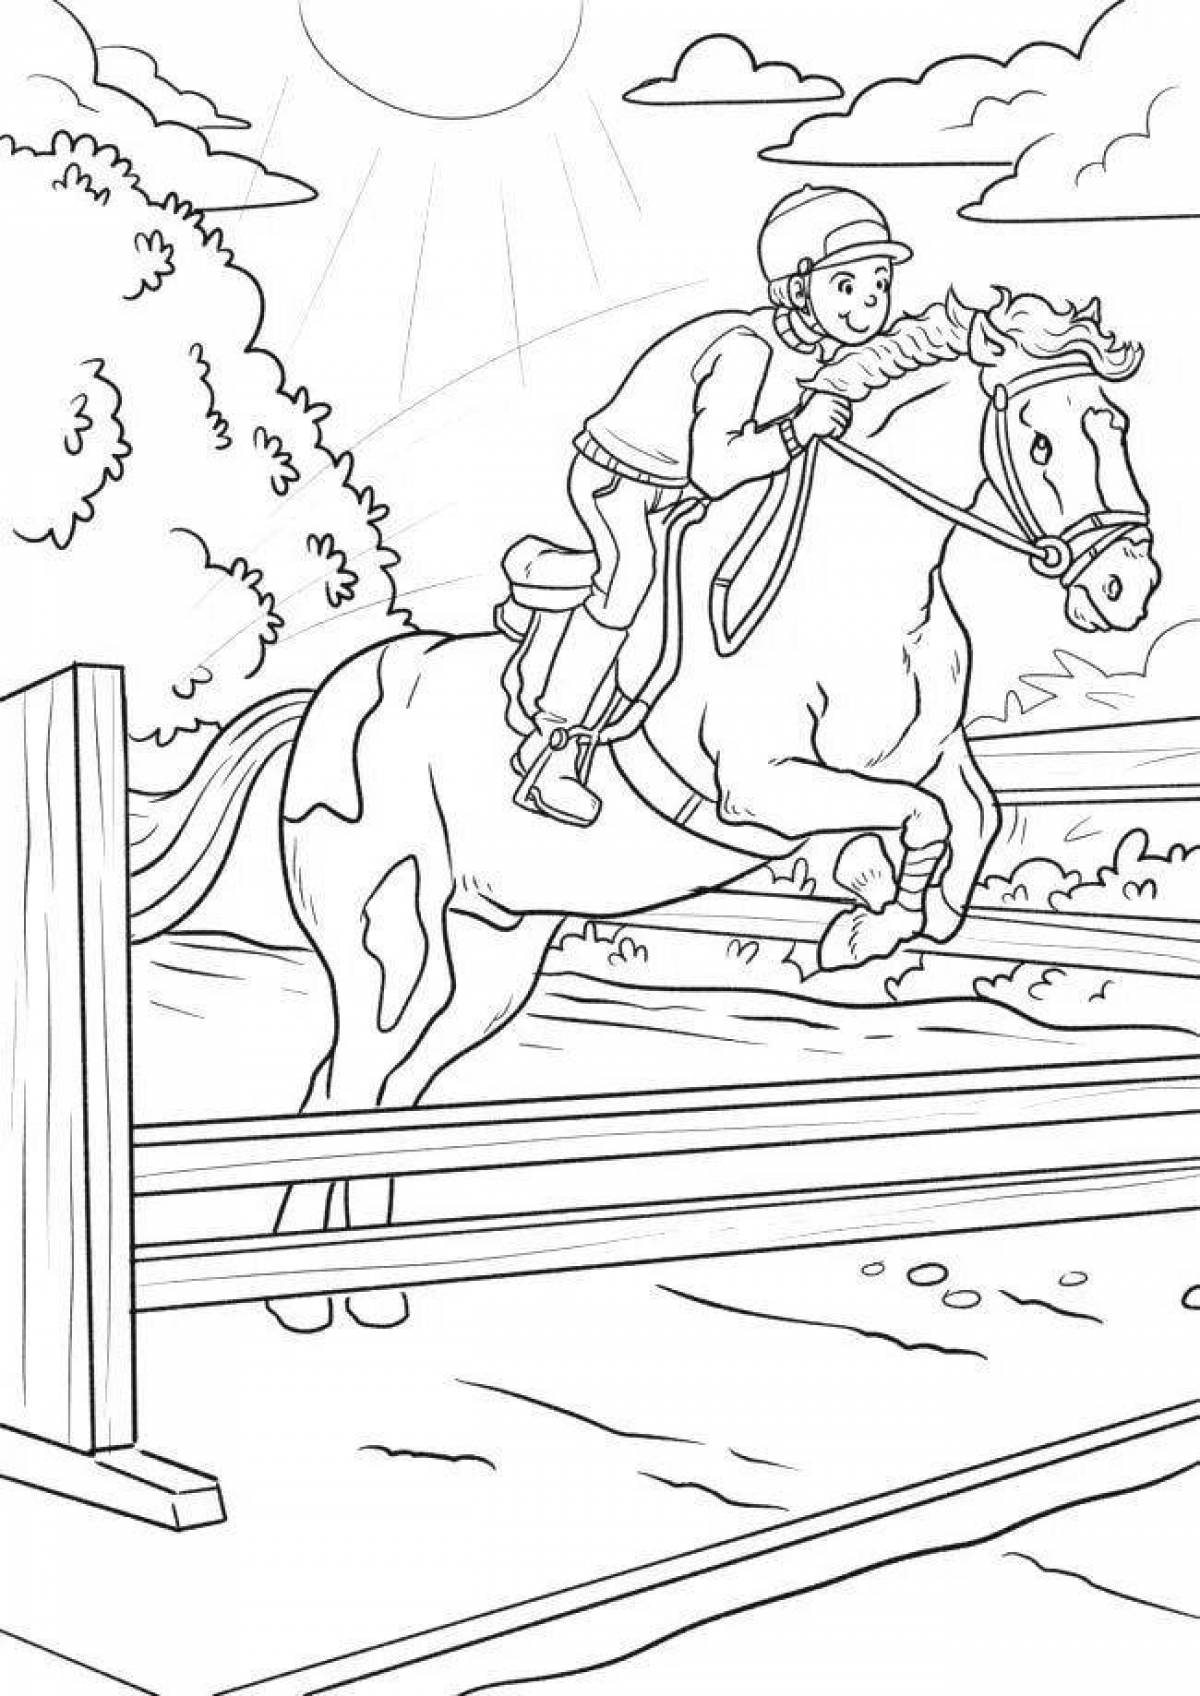 Coloring page dazzling jumping horse